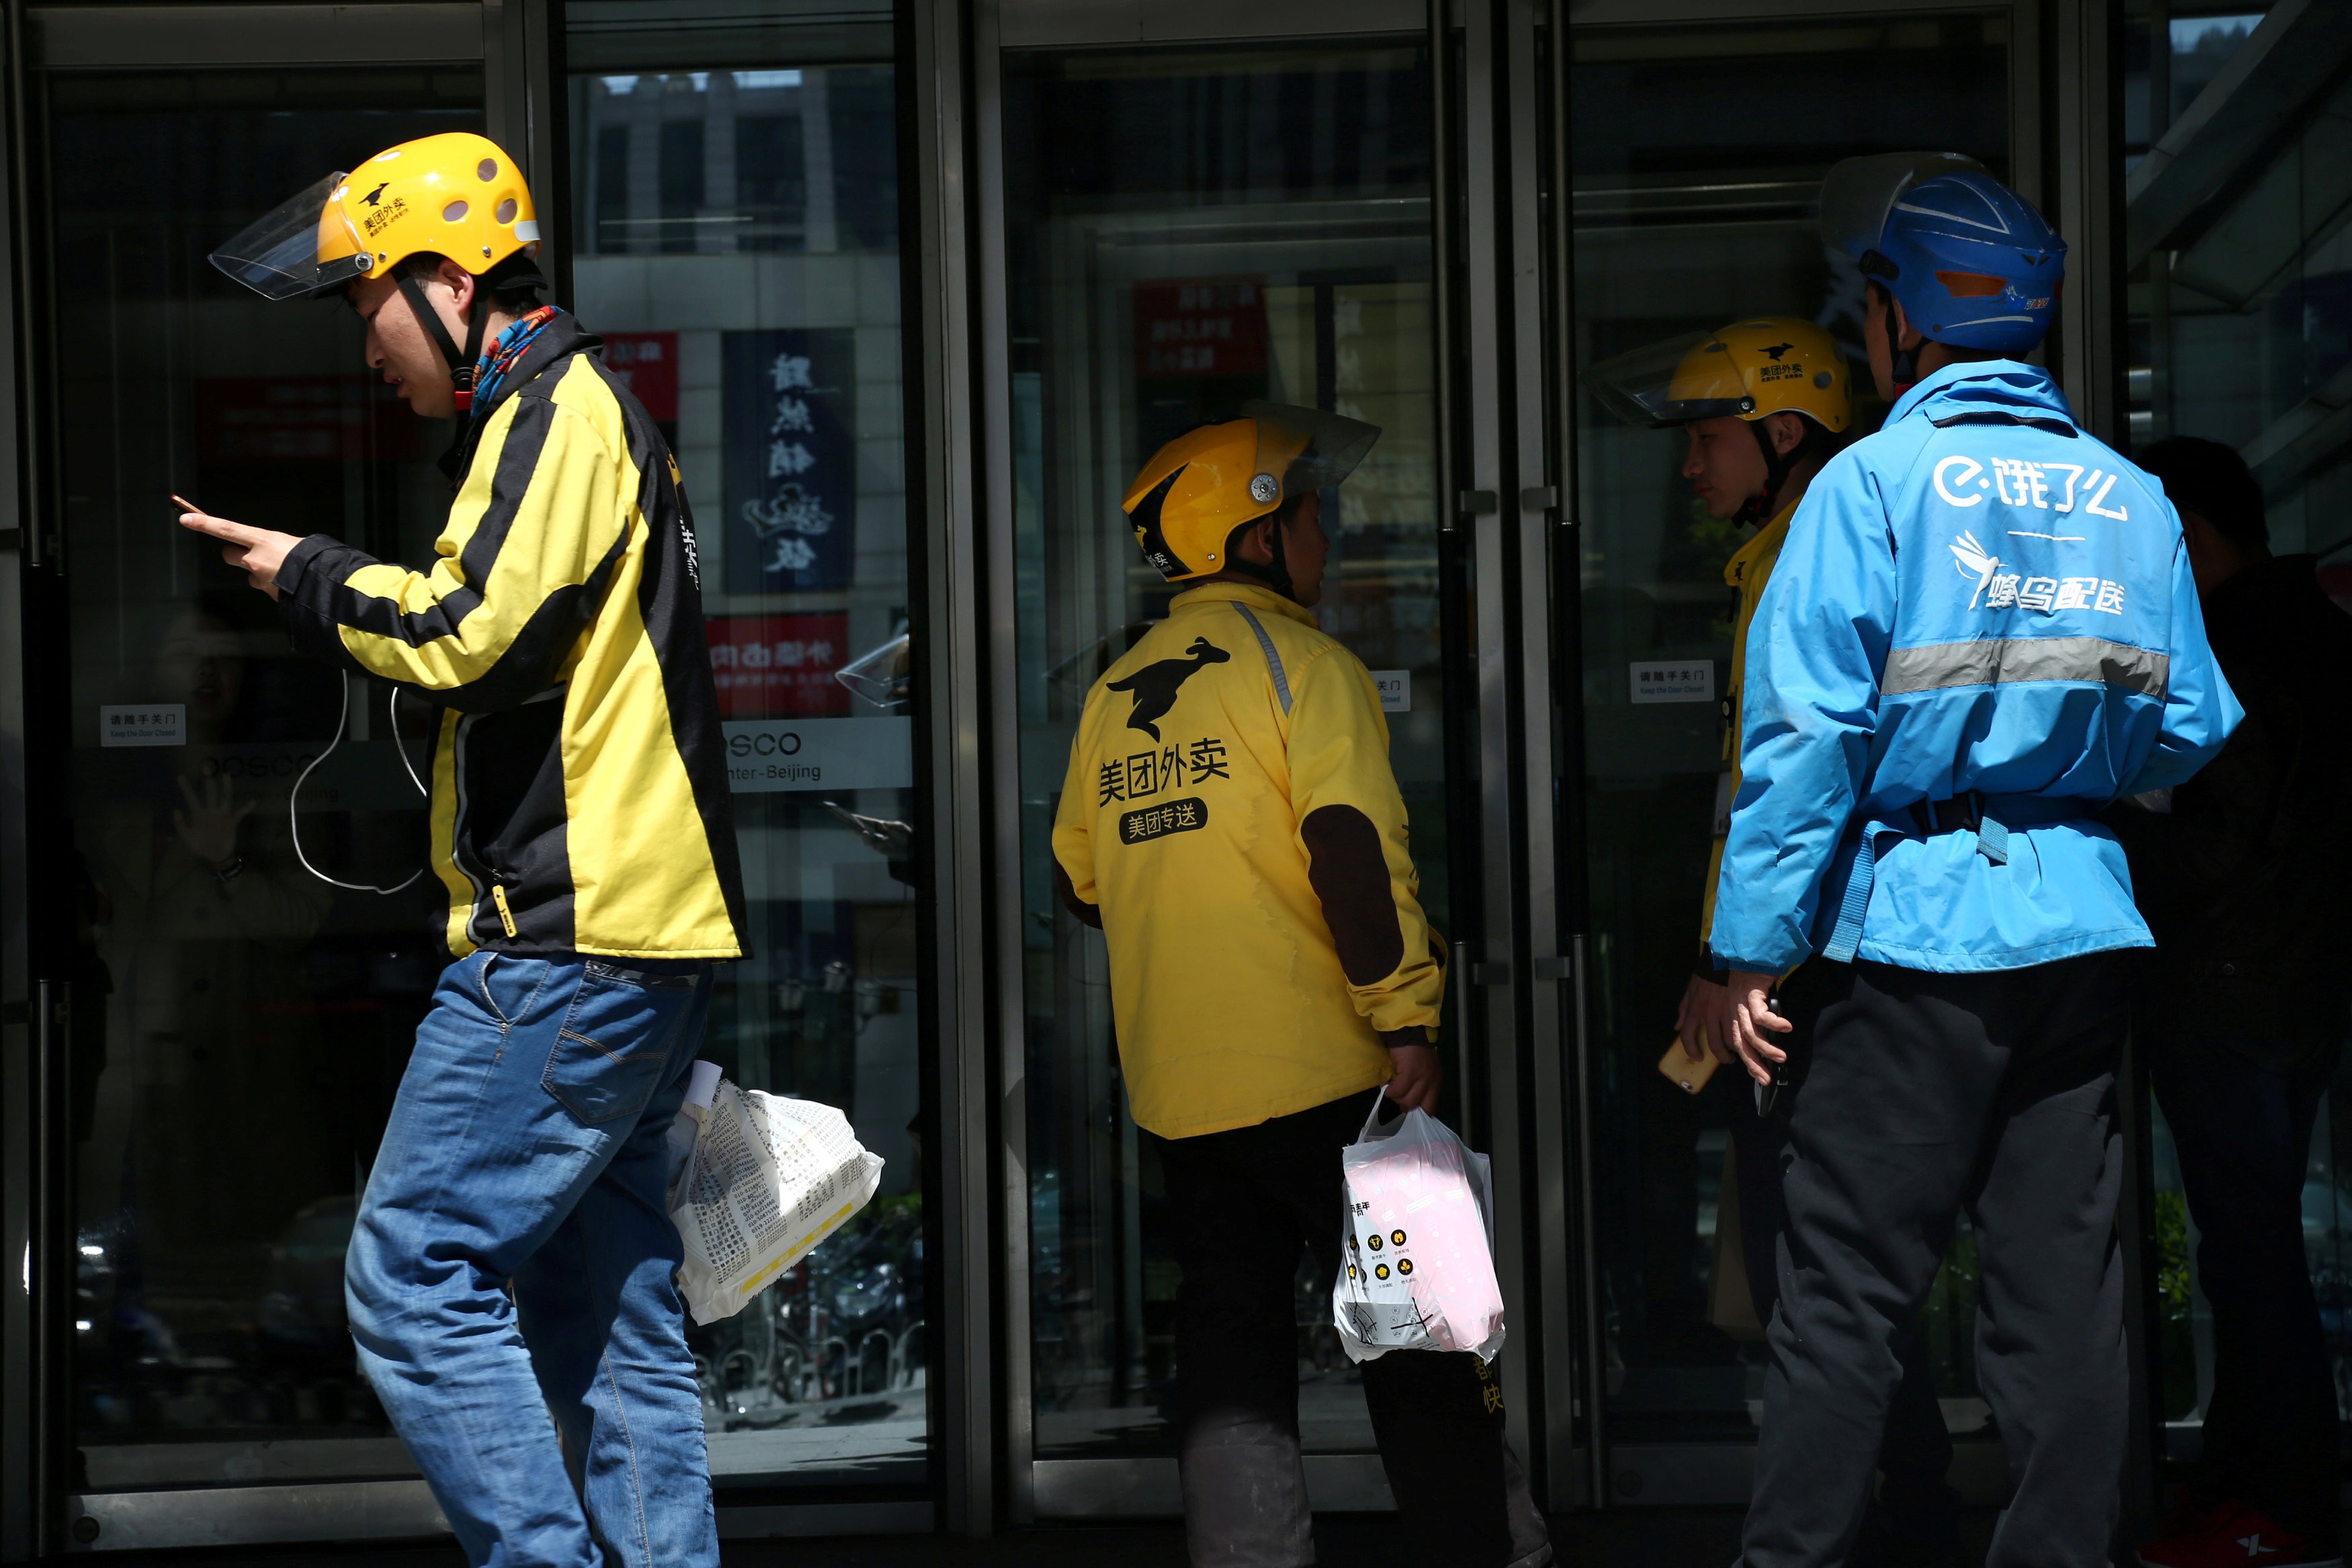 Drivers of on-demand food delivery services providers Ele.me, in blue, and Meituan Dianping, in yellow, are seen in Beijing on April 11, 2018. Photo: Reuters